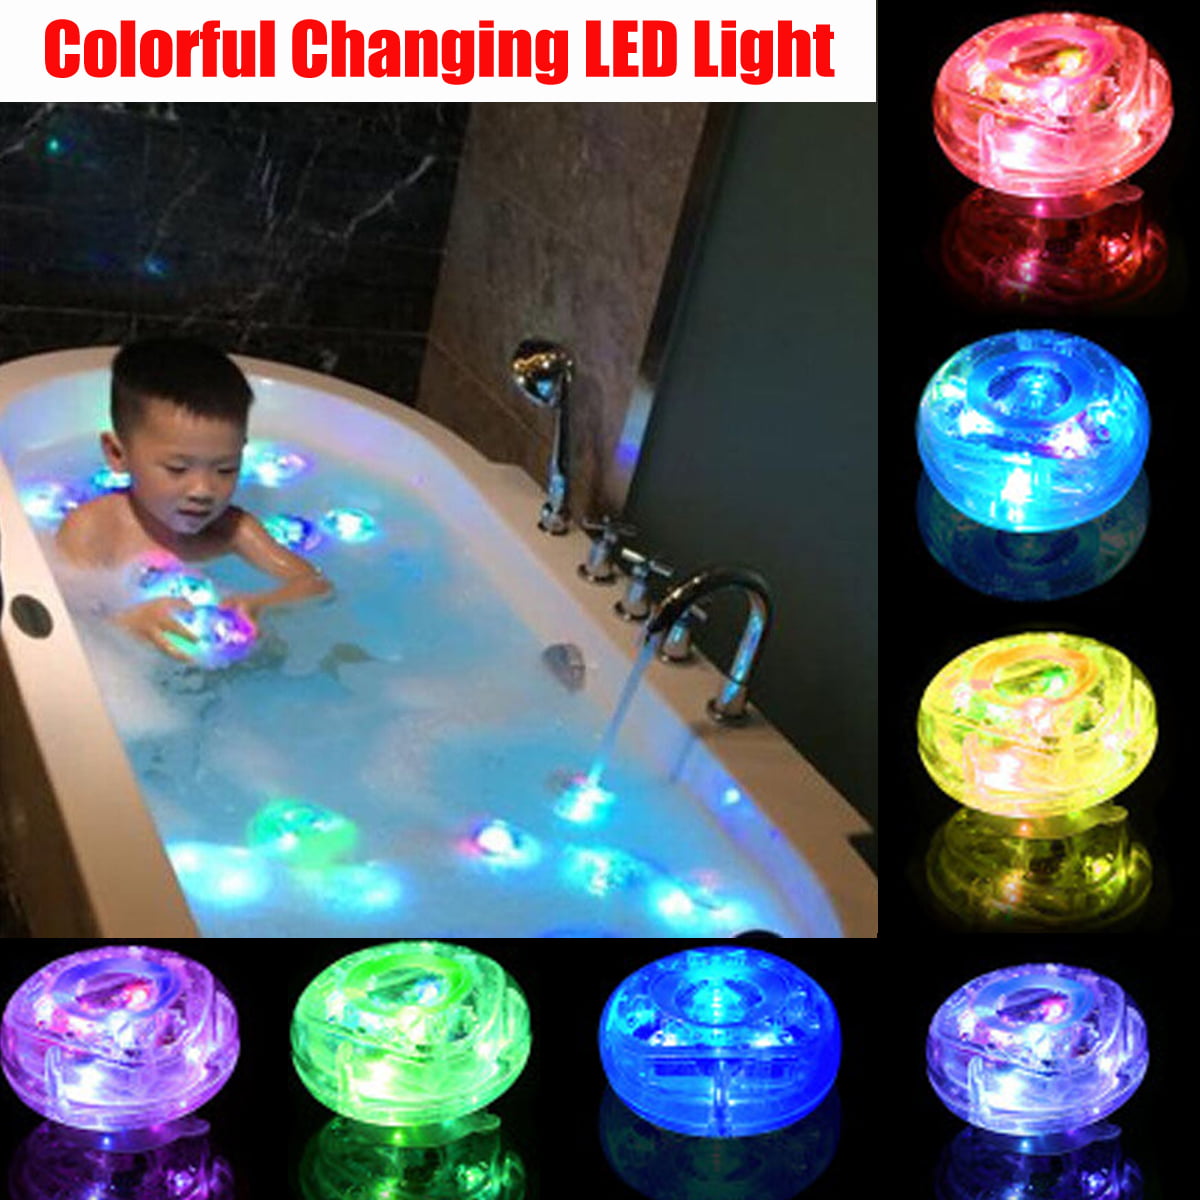 Kids Baby Toys Bathroom LED Light Color Changing Waterproof Bath Time For Fun 